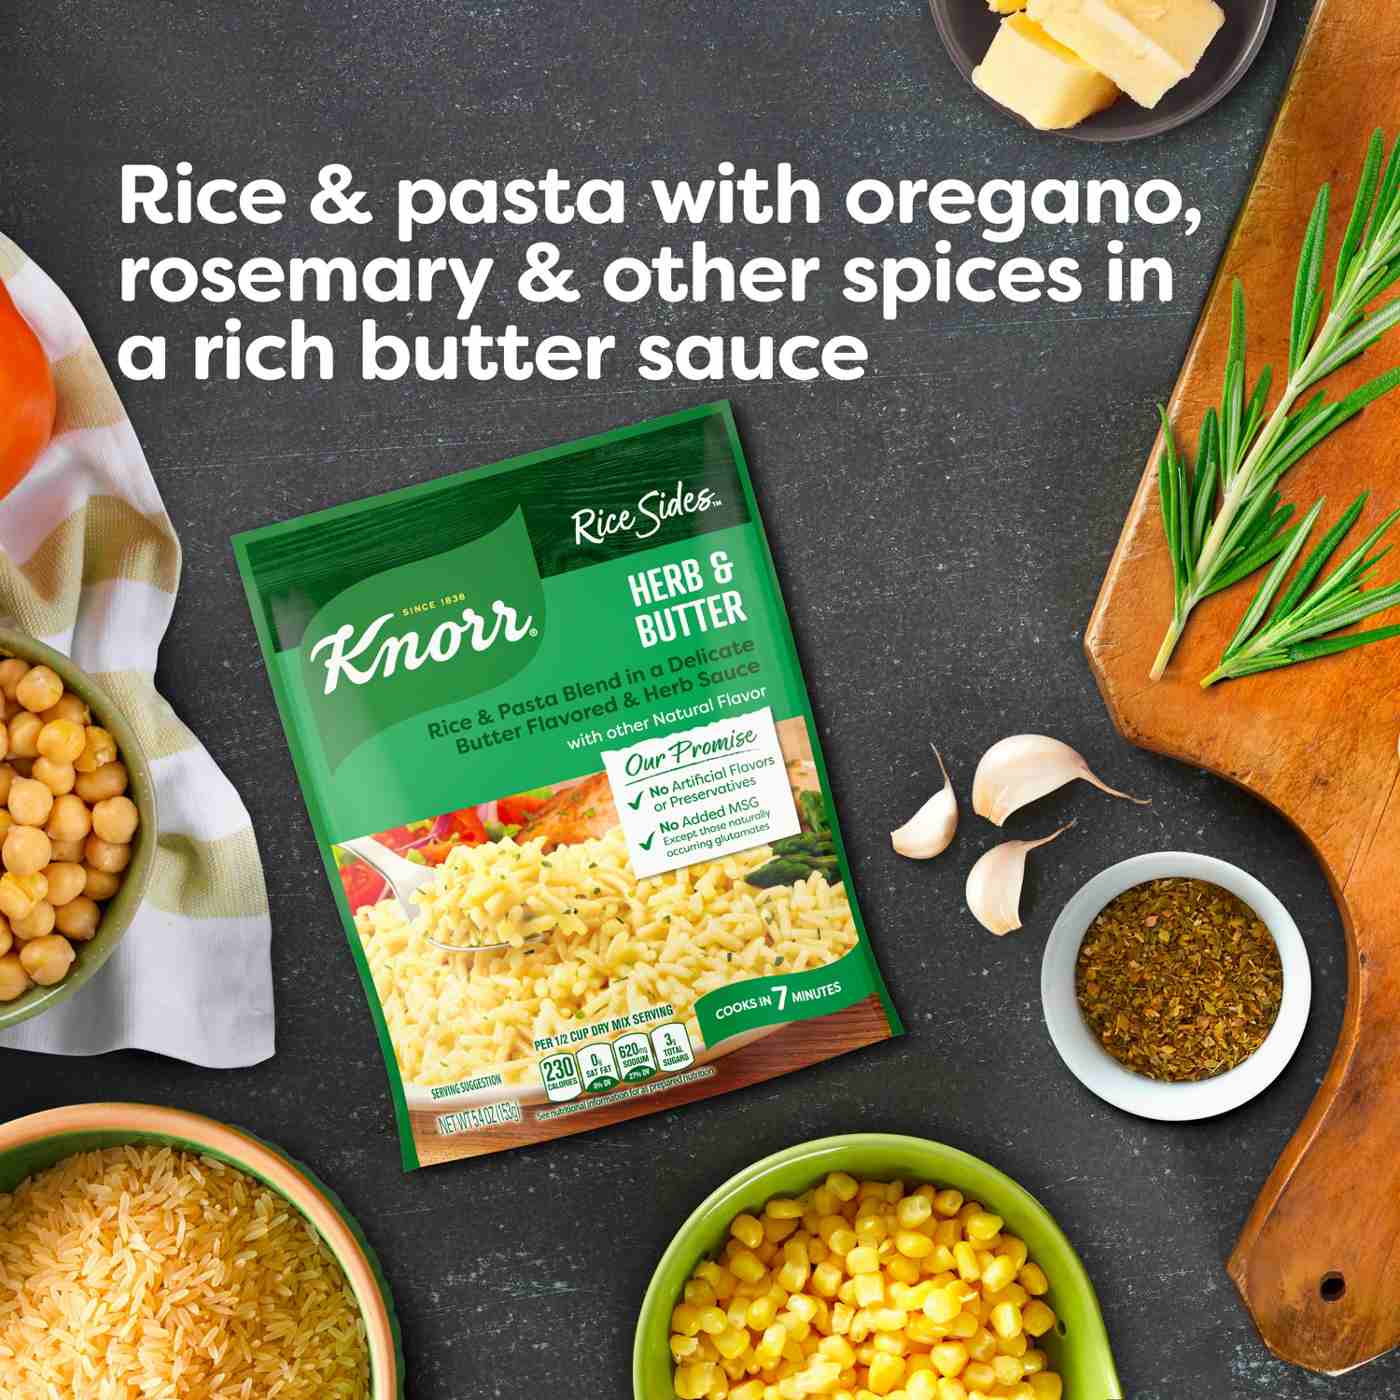 Knorr Rice Sides Herb & Butter Long Grain Rice and Vermicelli Pasta Blend; image 6 of 8